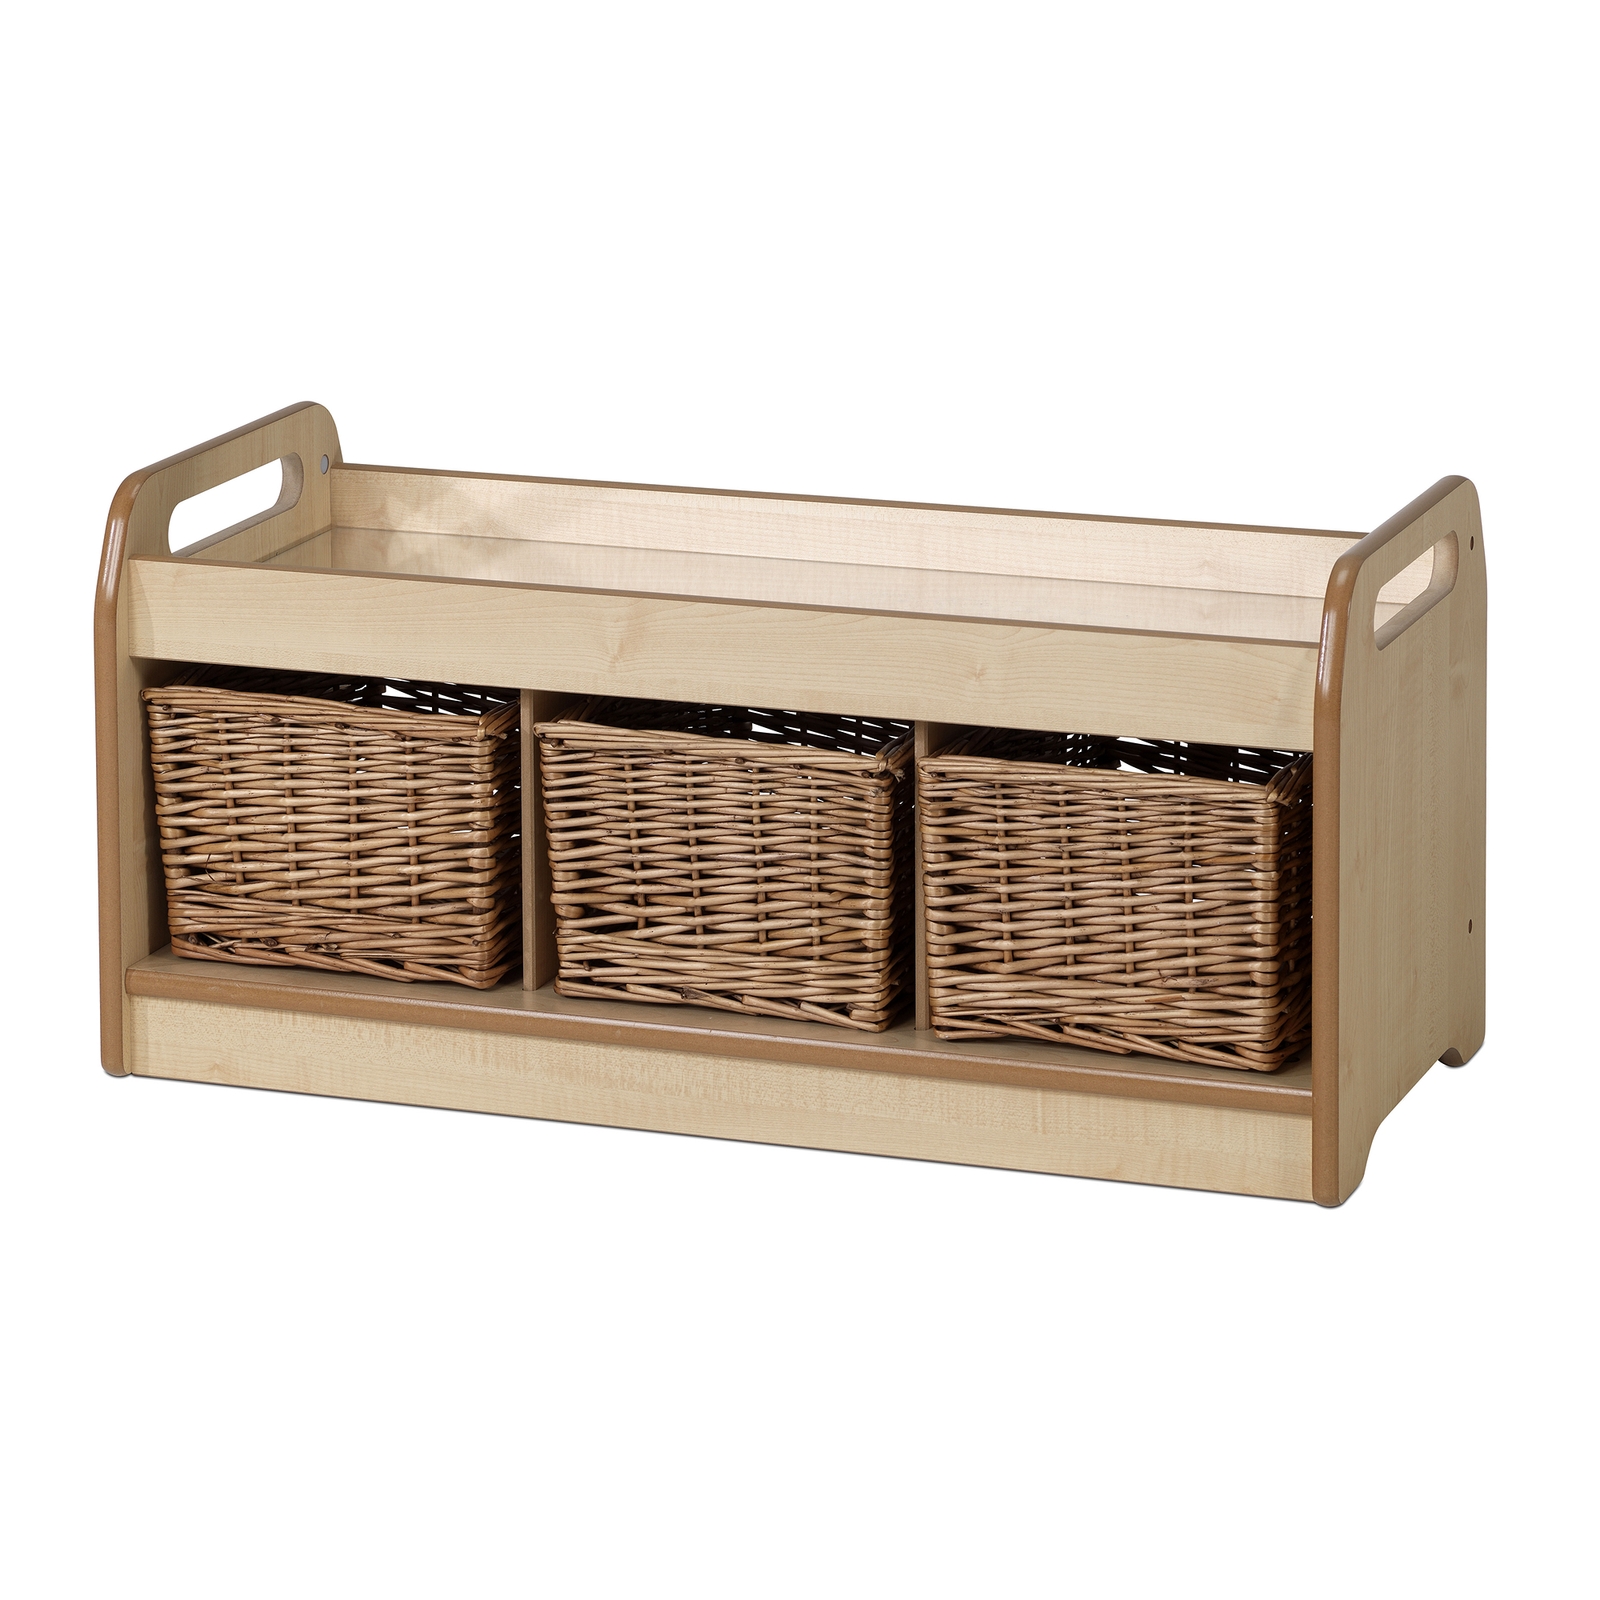 Playscapes Low Mirror Play Unit - Wicker Baskets